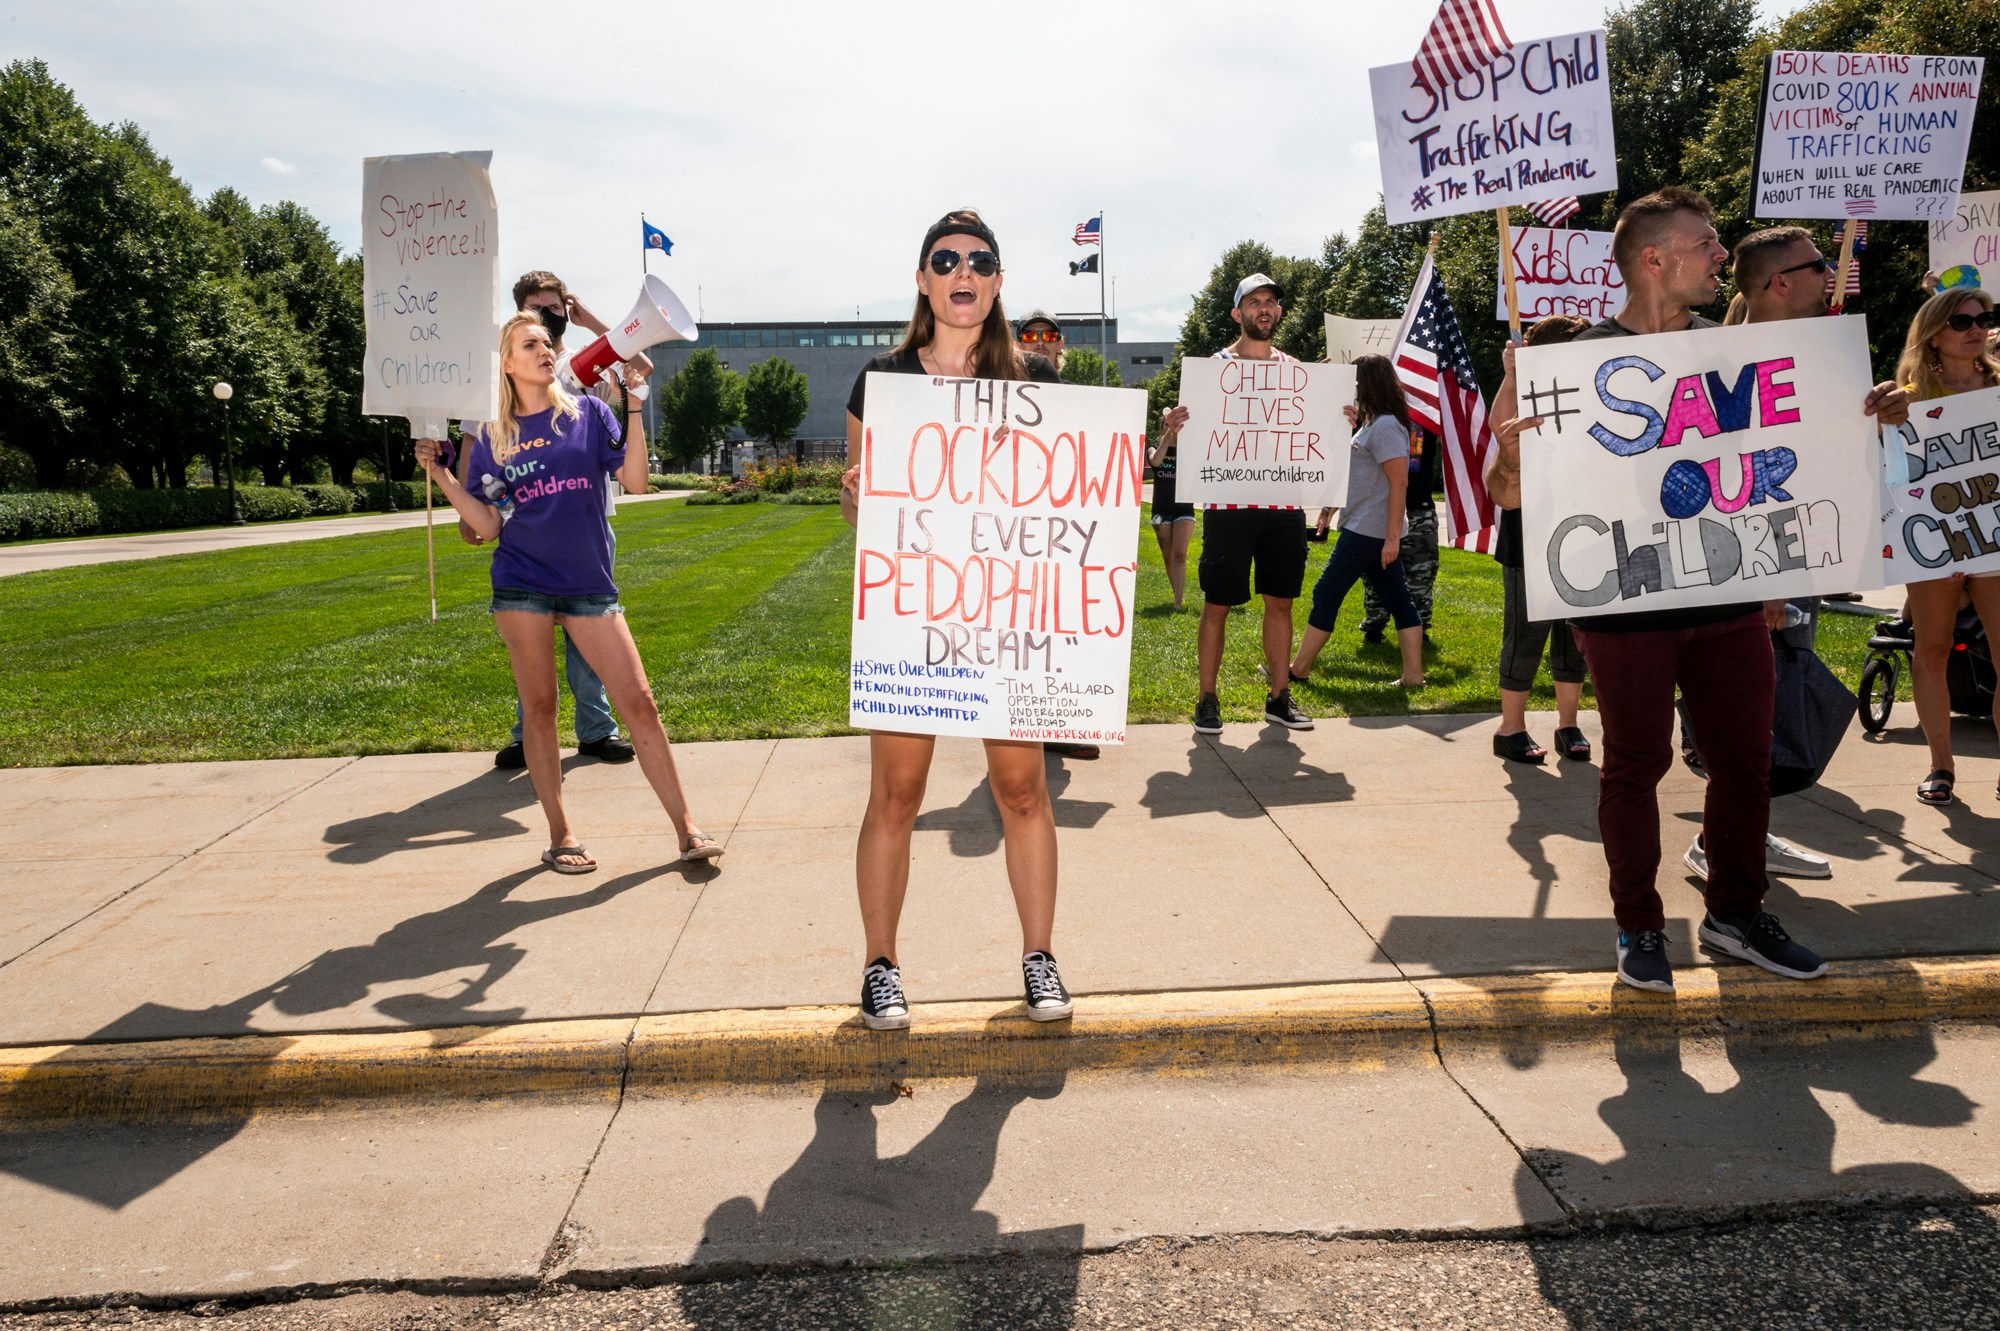 People march during a "Save the Children" rally outside the Capitol building on August 22, 2020 in St Paul, Minnesota.